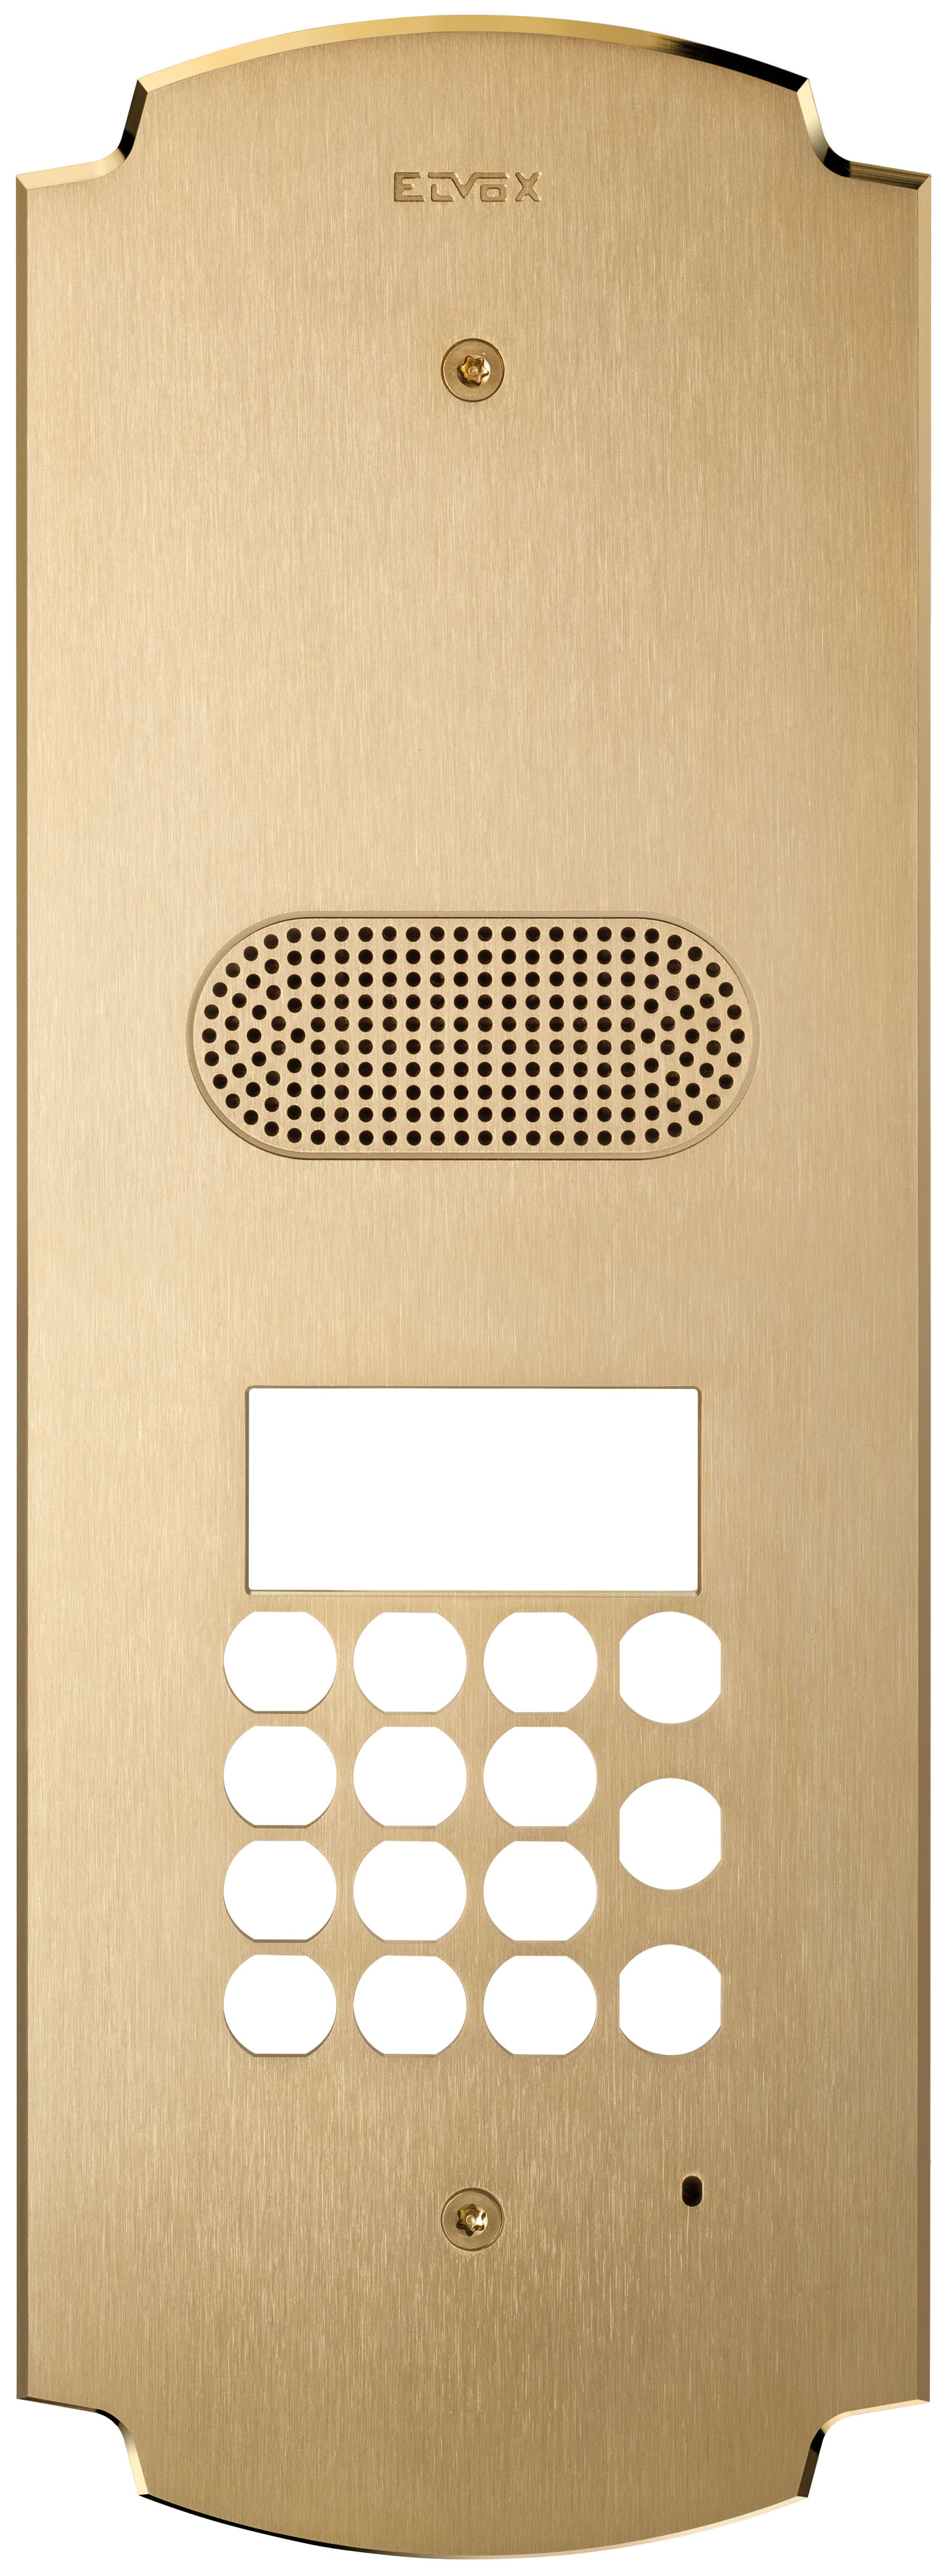 ELVOX PATAVIUM SERIES 2-MODULE AUDIO WITH KEYPAD COVER PLATE ONLY BRASS SURF/FLUSH MOUNTED 334Hx119.8Wx43.3D (MM) SUITS ELV13A4.B.43